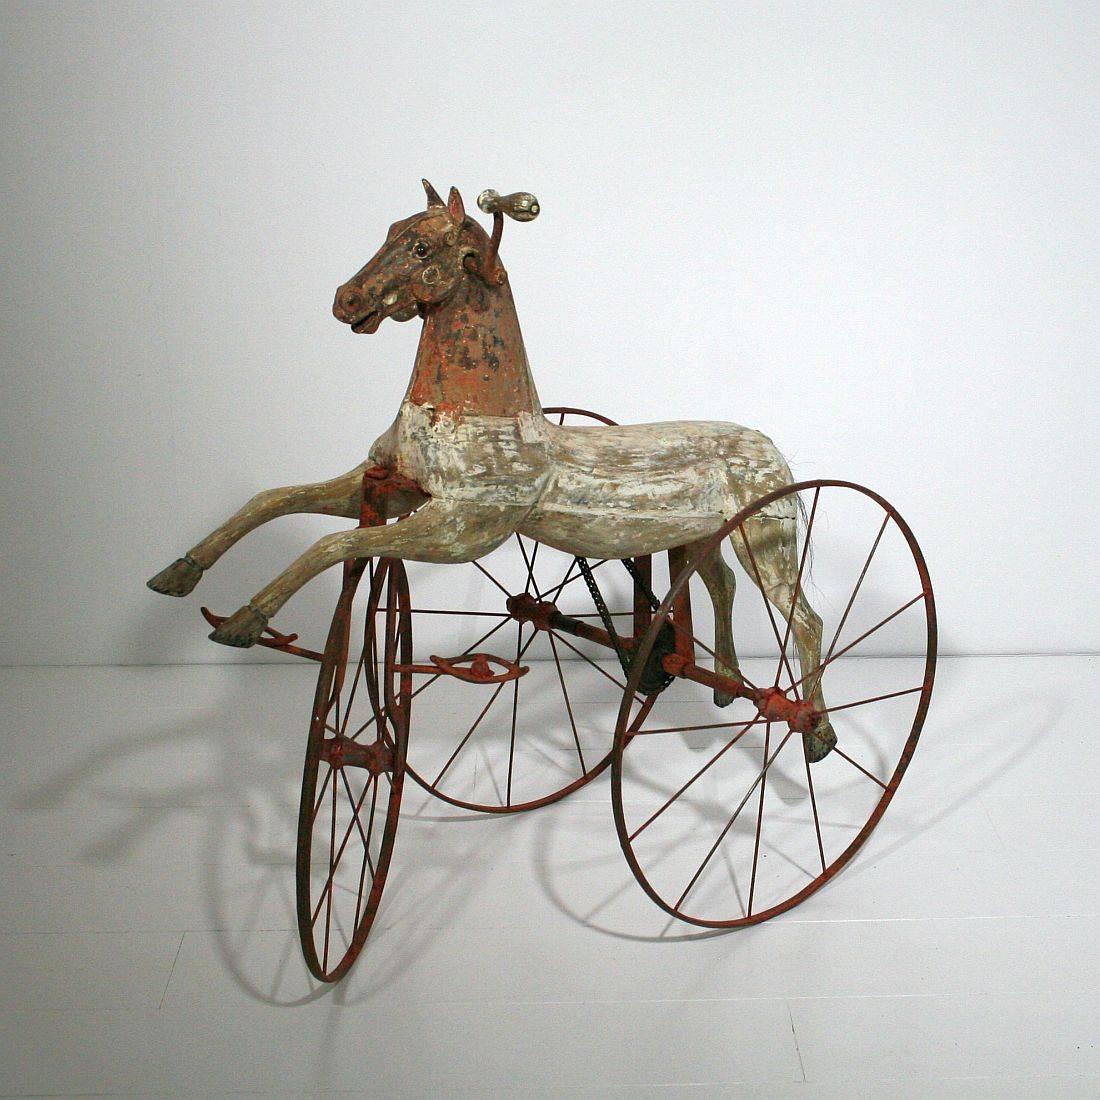 Beautiful and complete tricycle horse with its cast iron details and glass eyes with a stunning patina. Completely original and without any repairs or alternations.

This type of 19th century French velocipede tricycle horse was originally